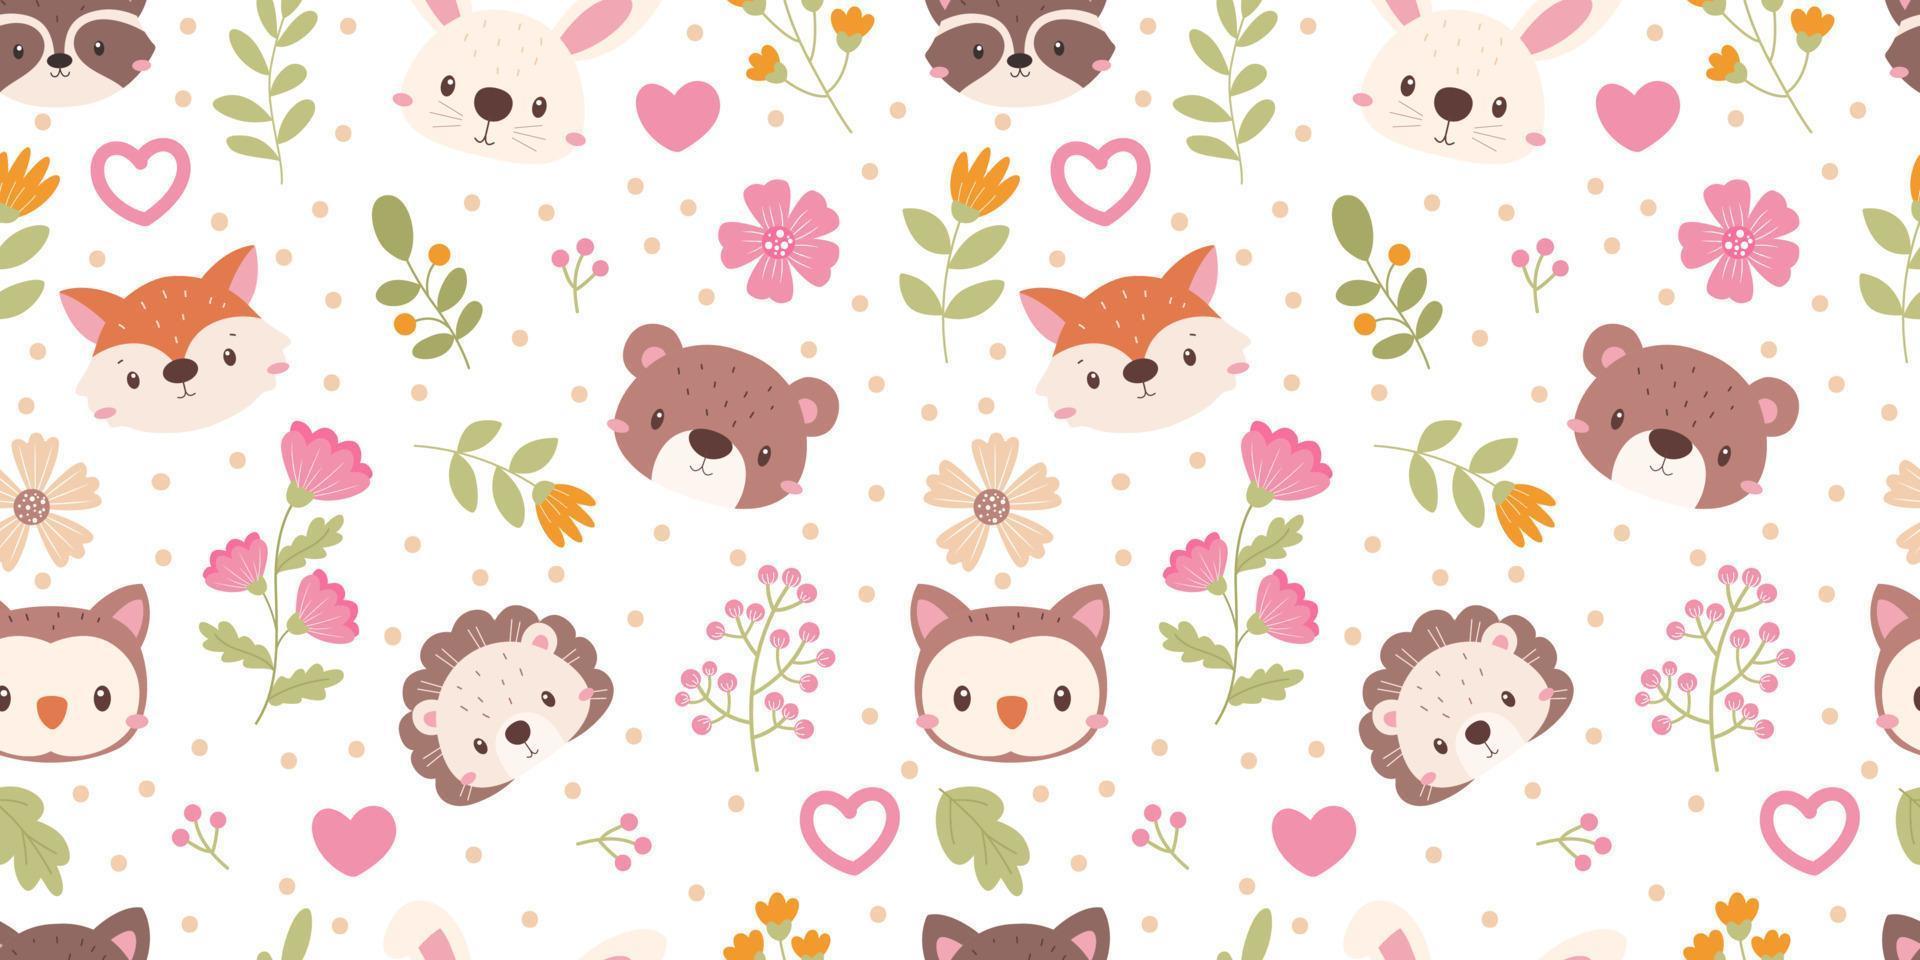 Cute animals face and floral seamless pattern vector